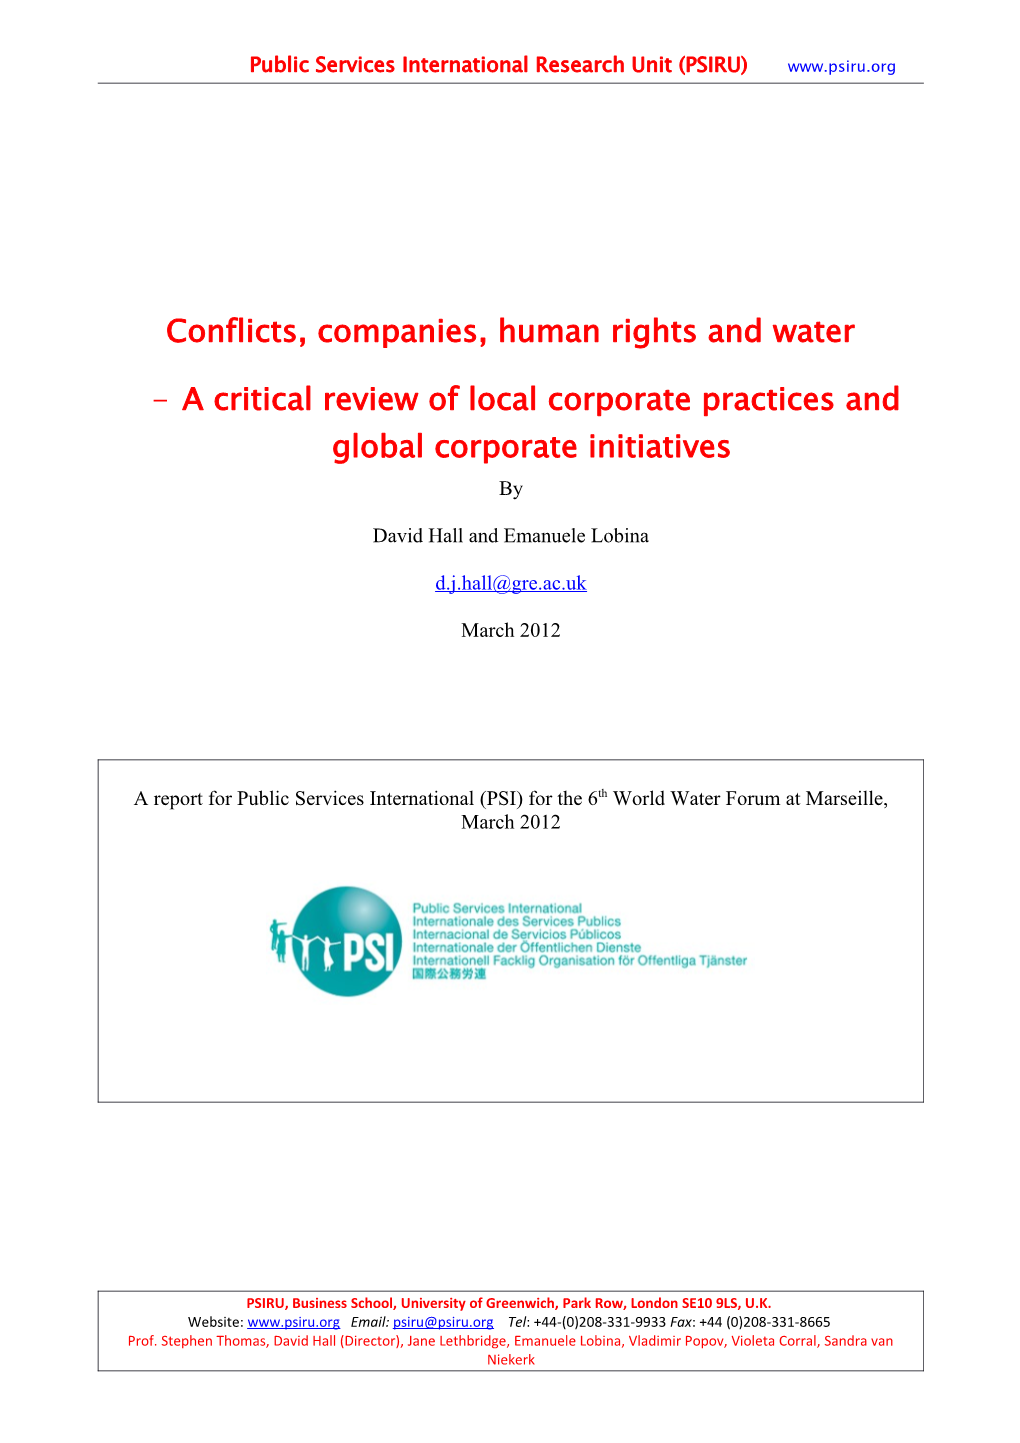 Conflicts, Companies, Human Rights and Water